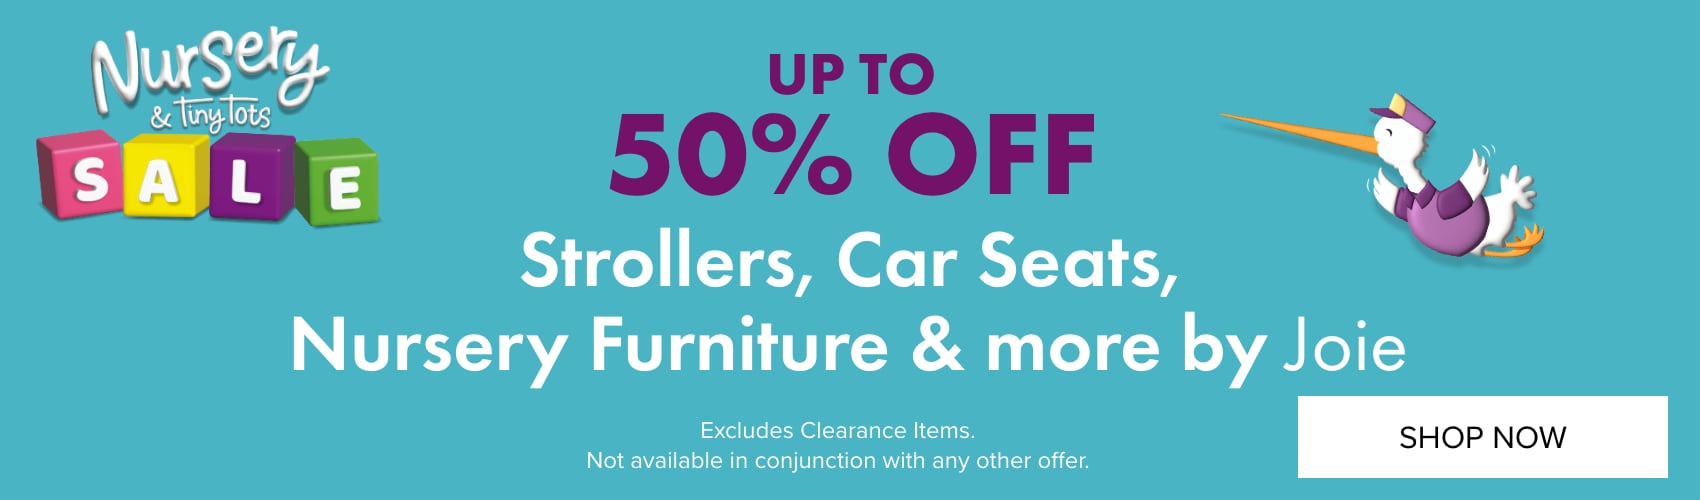 Upto 50% off strollers car seats nursery furniture & more by Joie